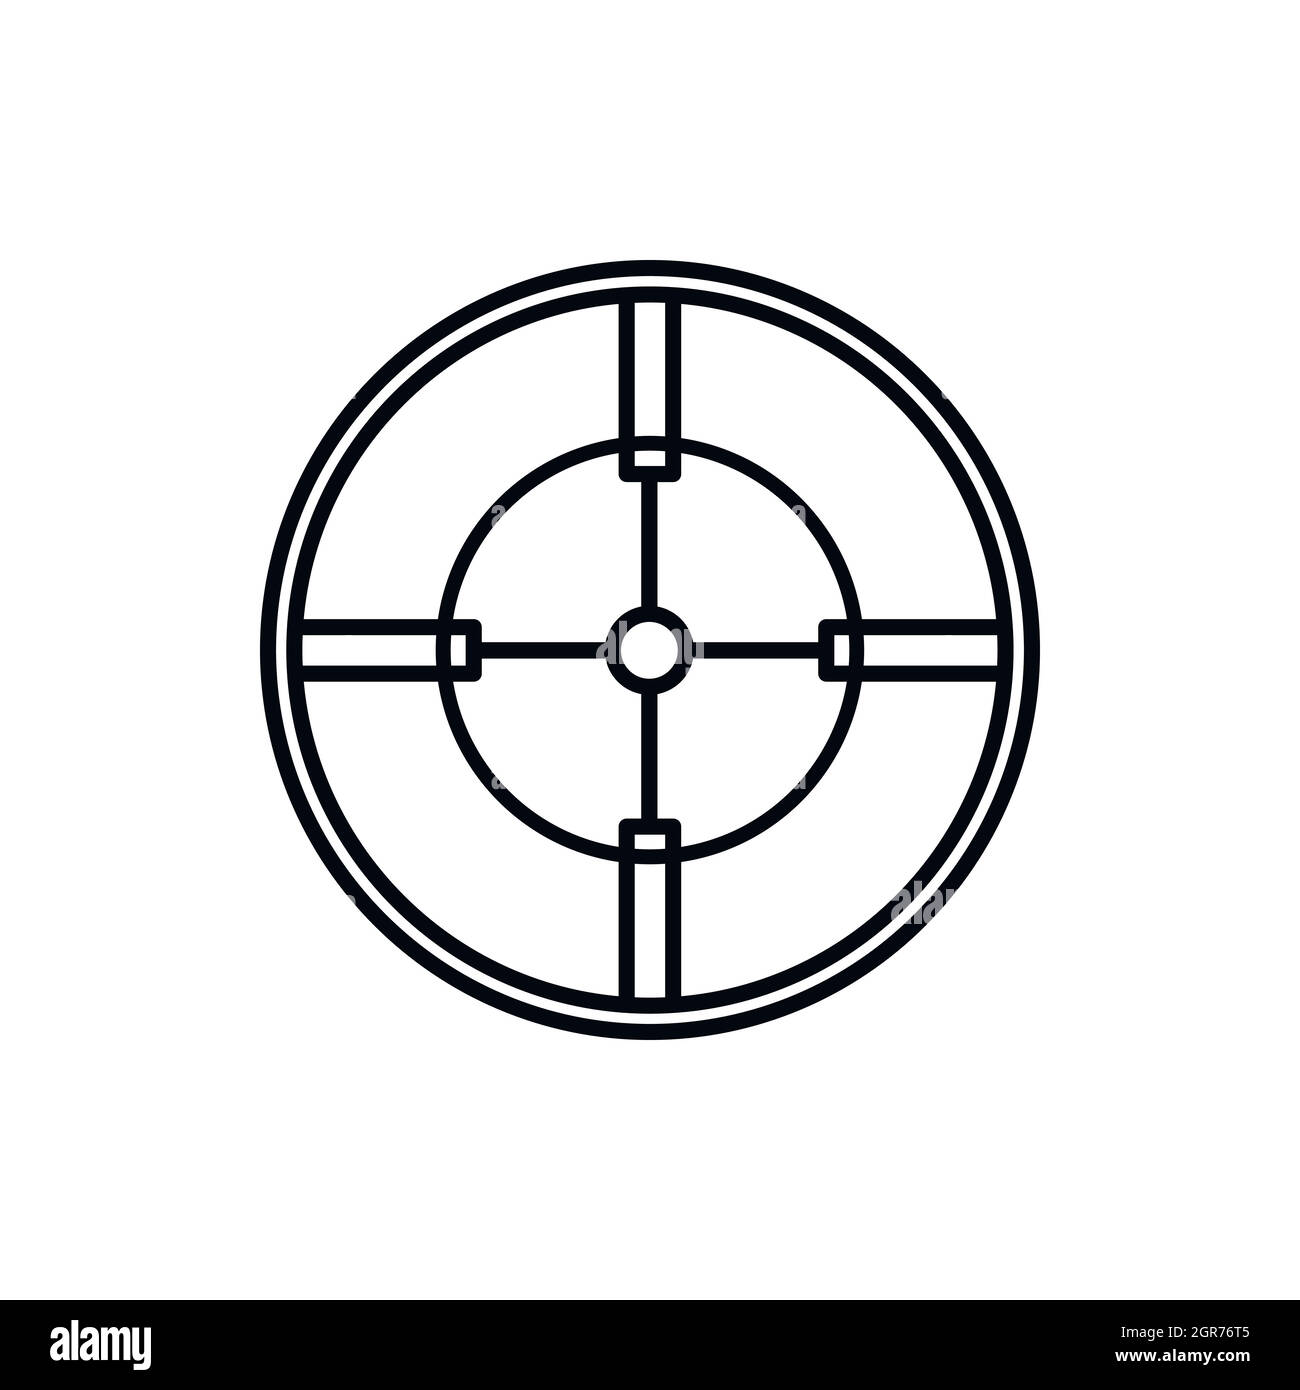 Crosshair reticle icon in outline style Stock Vector